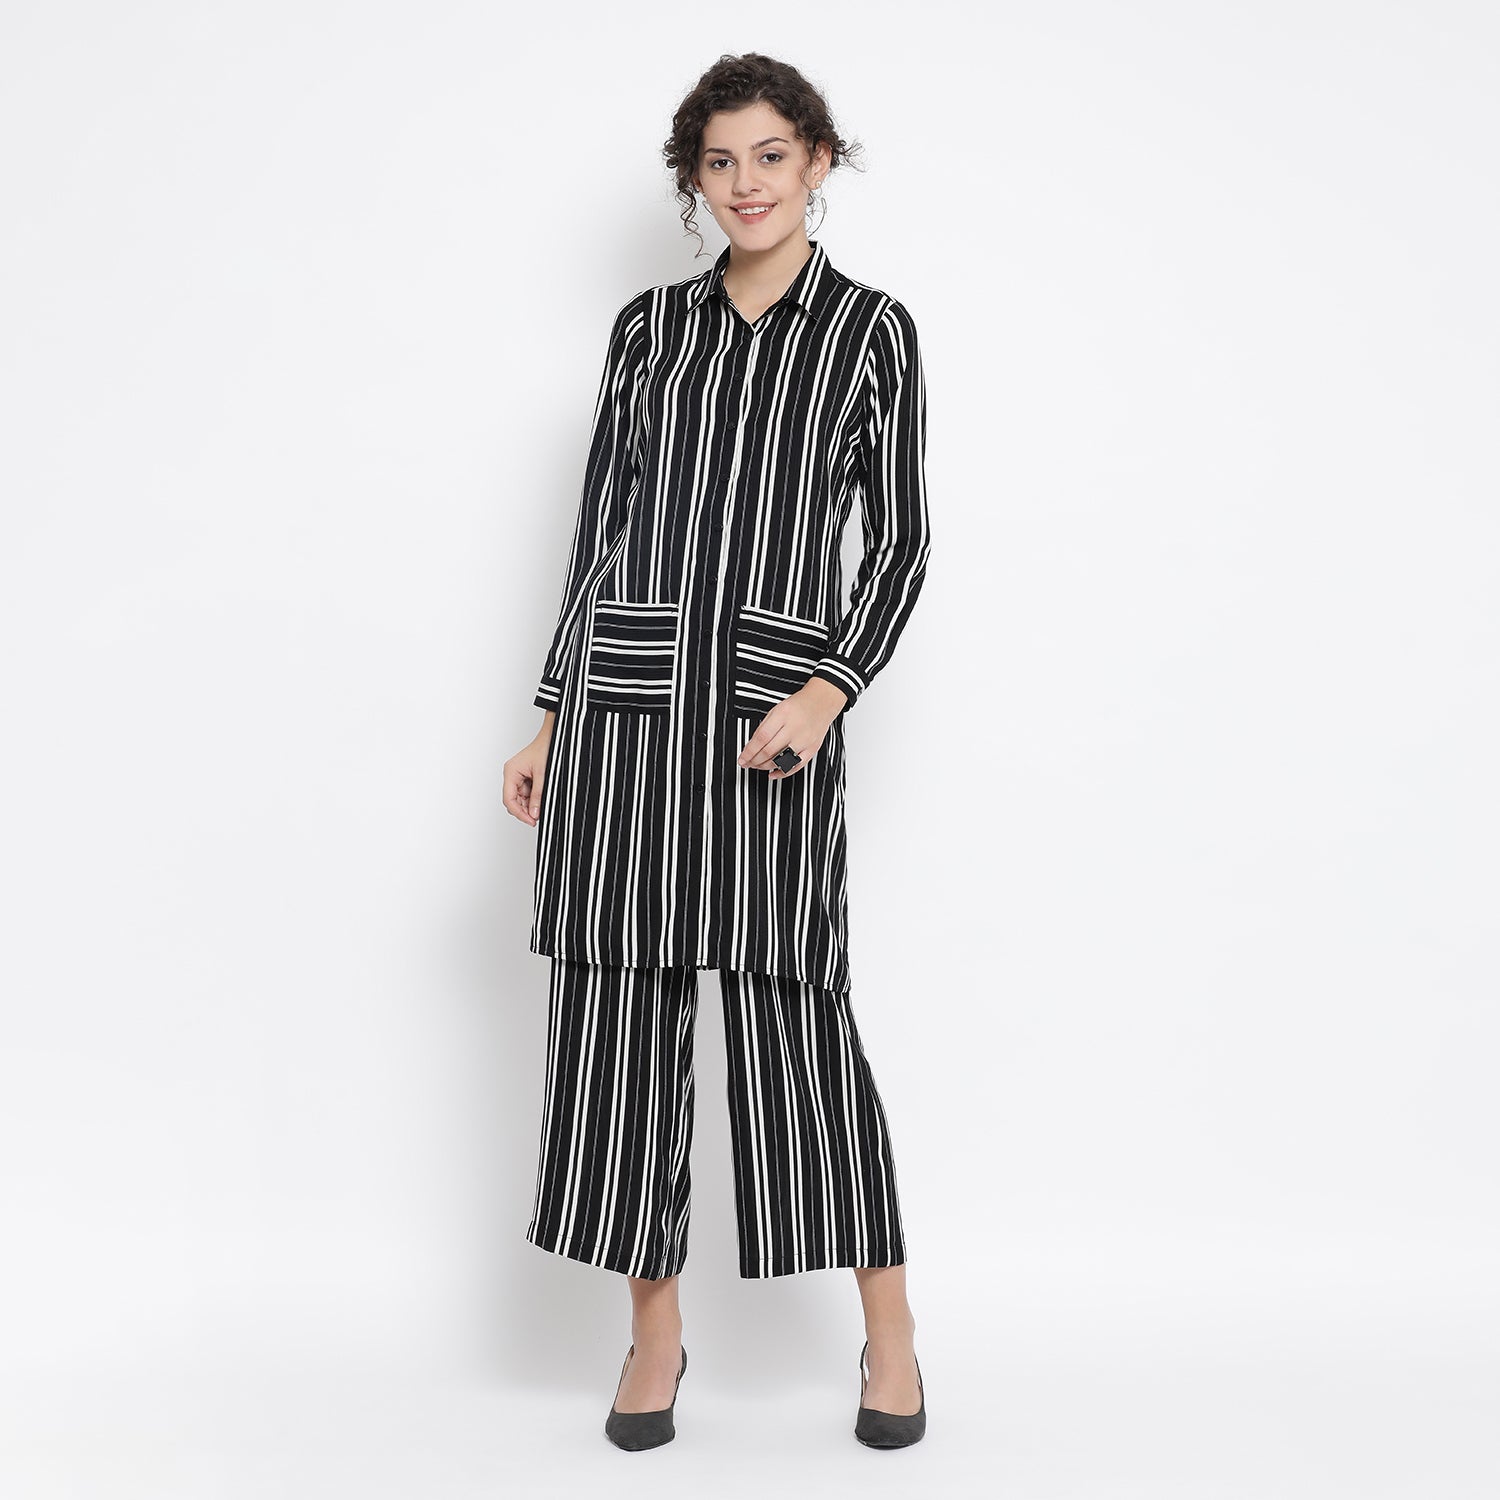 Black And White Stripe Dress With Pocket